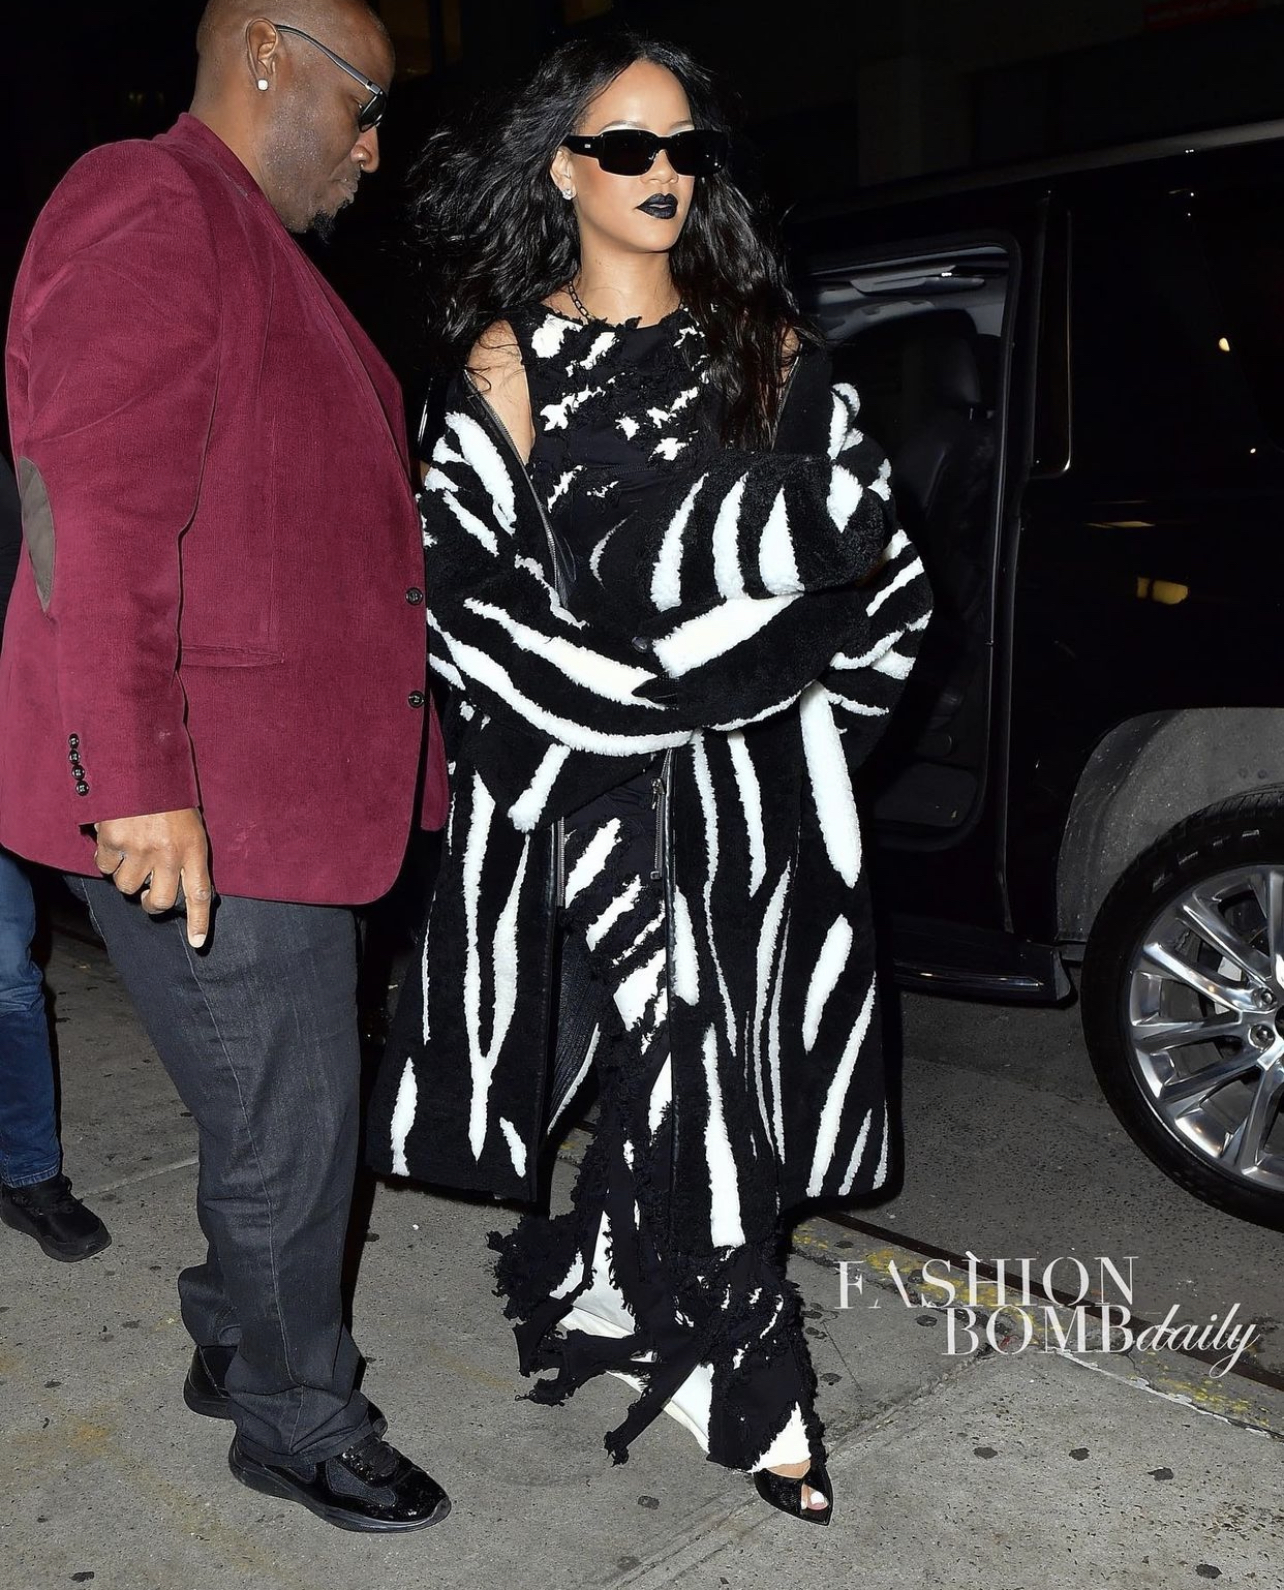 Rihanna Wears Rick Owens Black and White Distressed Dress and Coat While Heading to Halloween Party in NYC